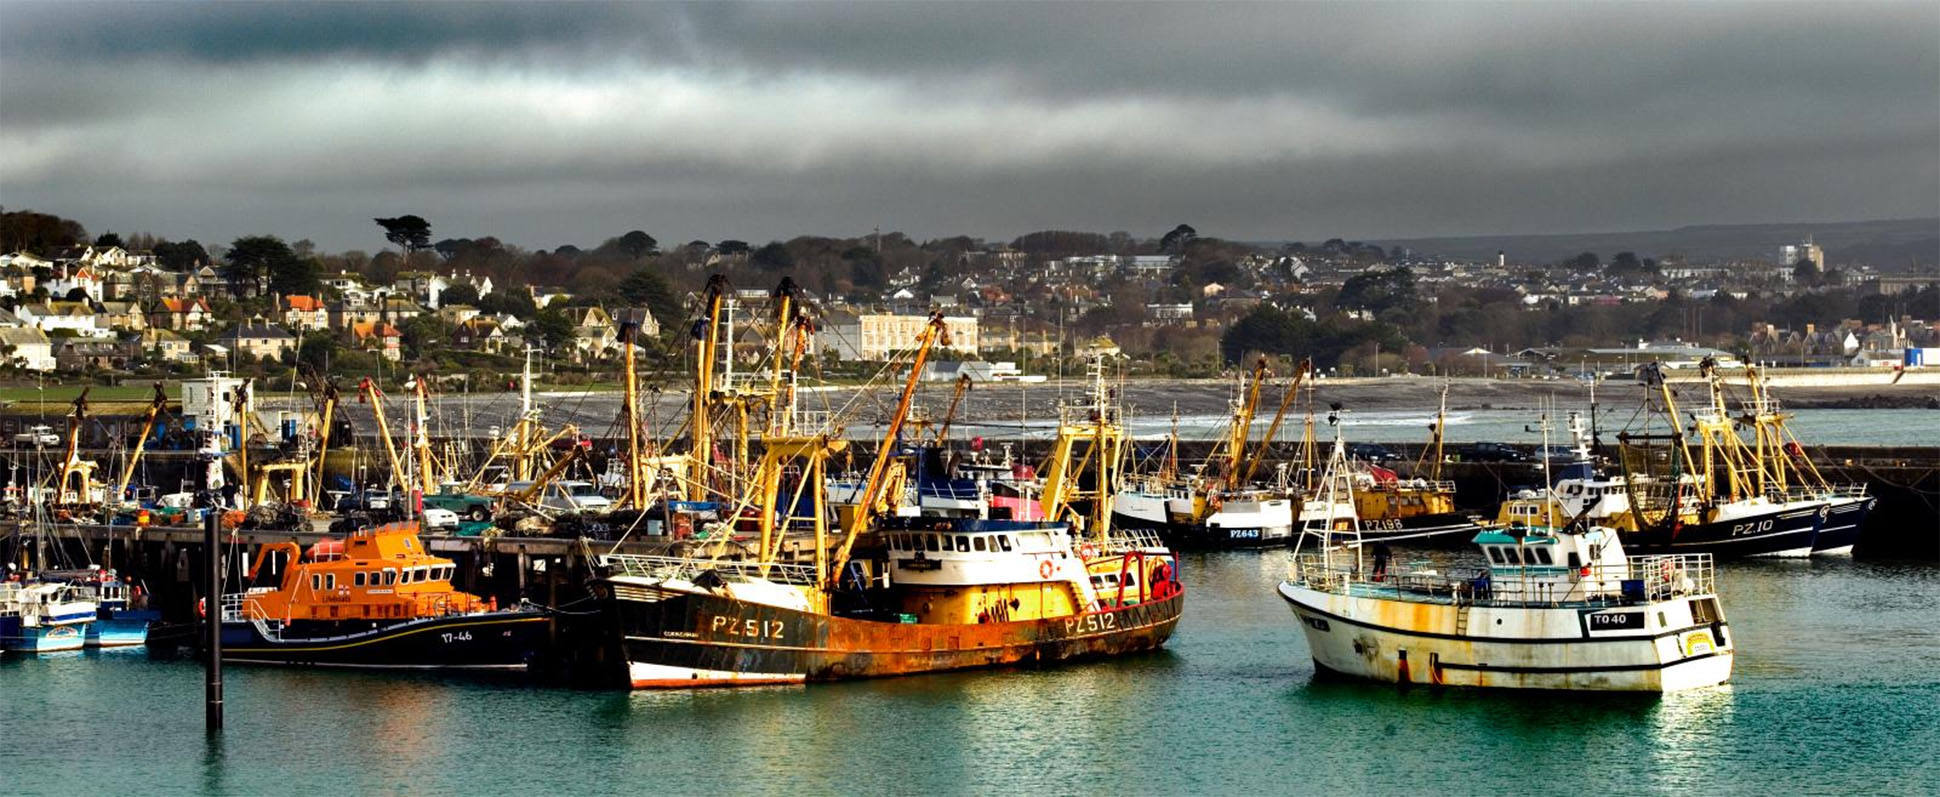 View across the harbour, Newlyn Fishing Port